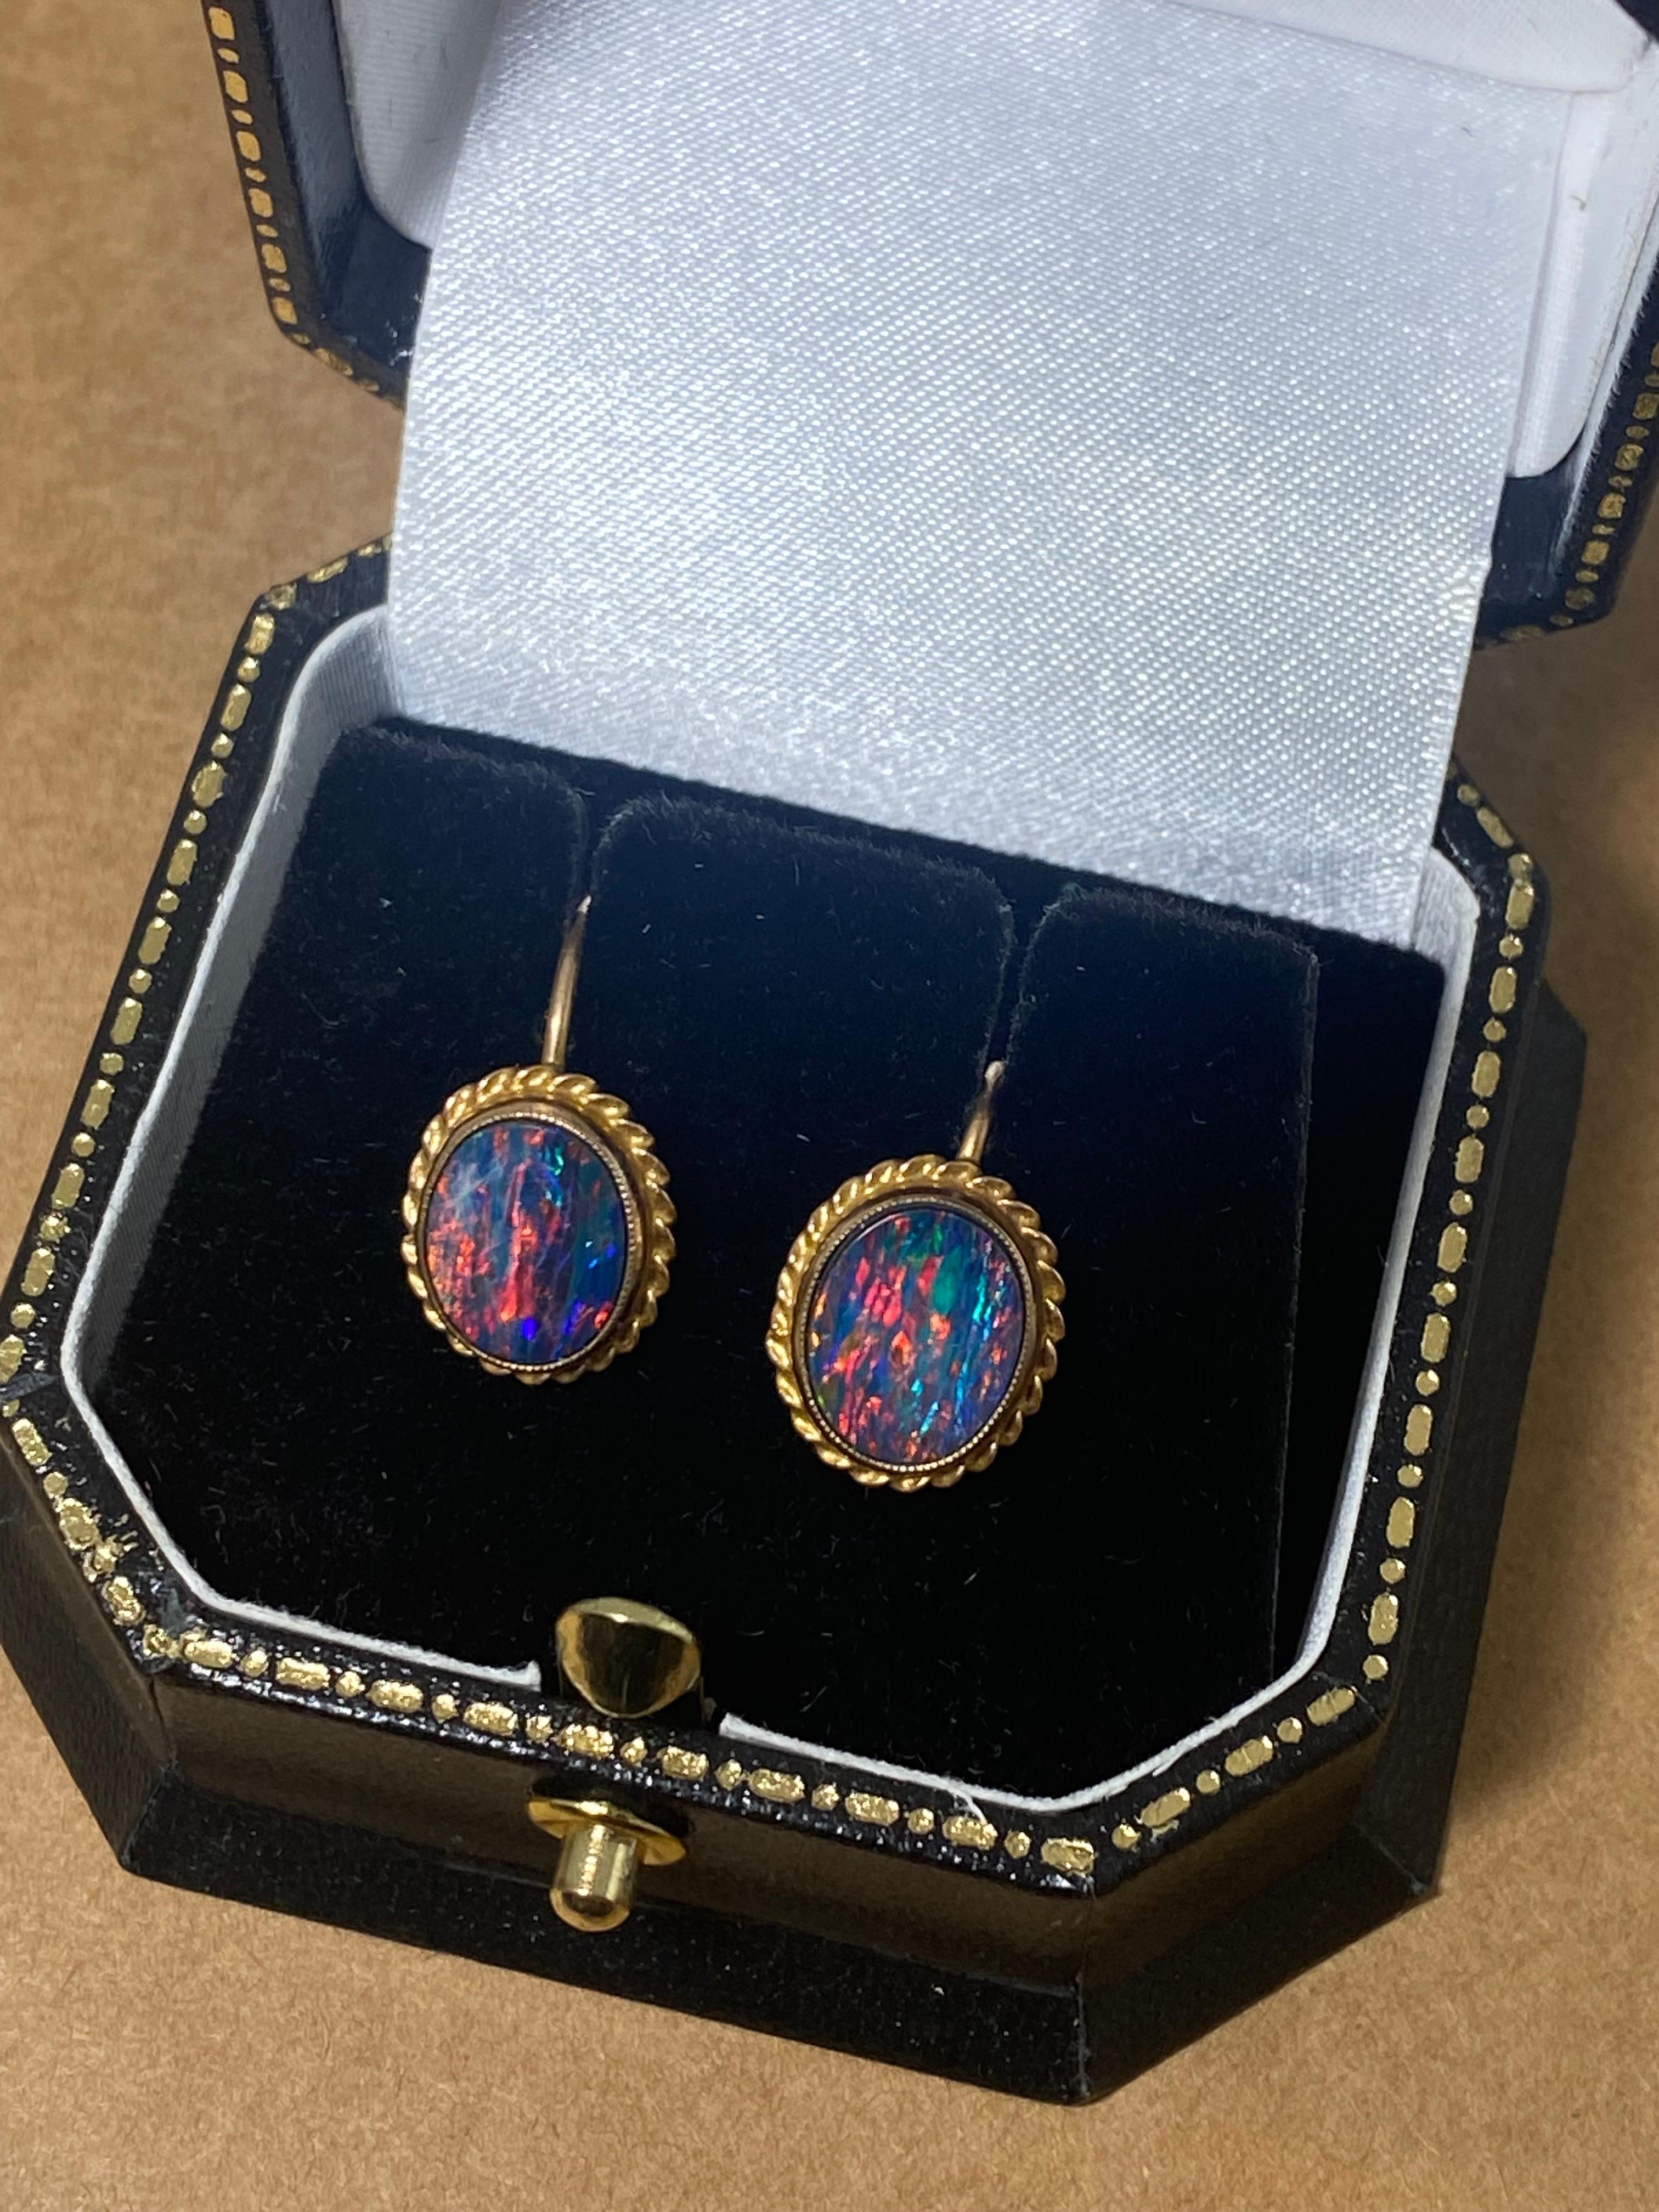 Handmade in 10K yellow gold, 
these clip on earrings are retro, 
yet in immaculate condition

Each bezel set with  
a 1.50ct Boulder Opal from Winton, 
(8mm x 9.5mm approx.)
of oval shape & top quality, 
displaying the most unique myriad of colours